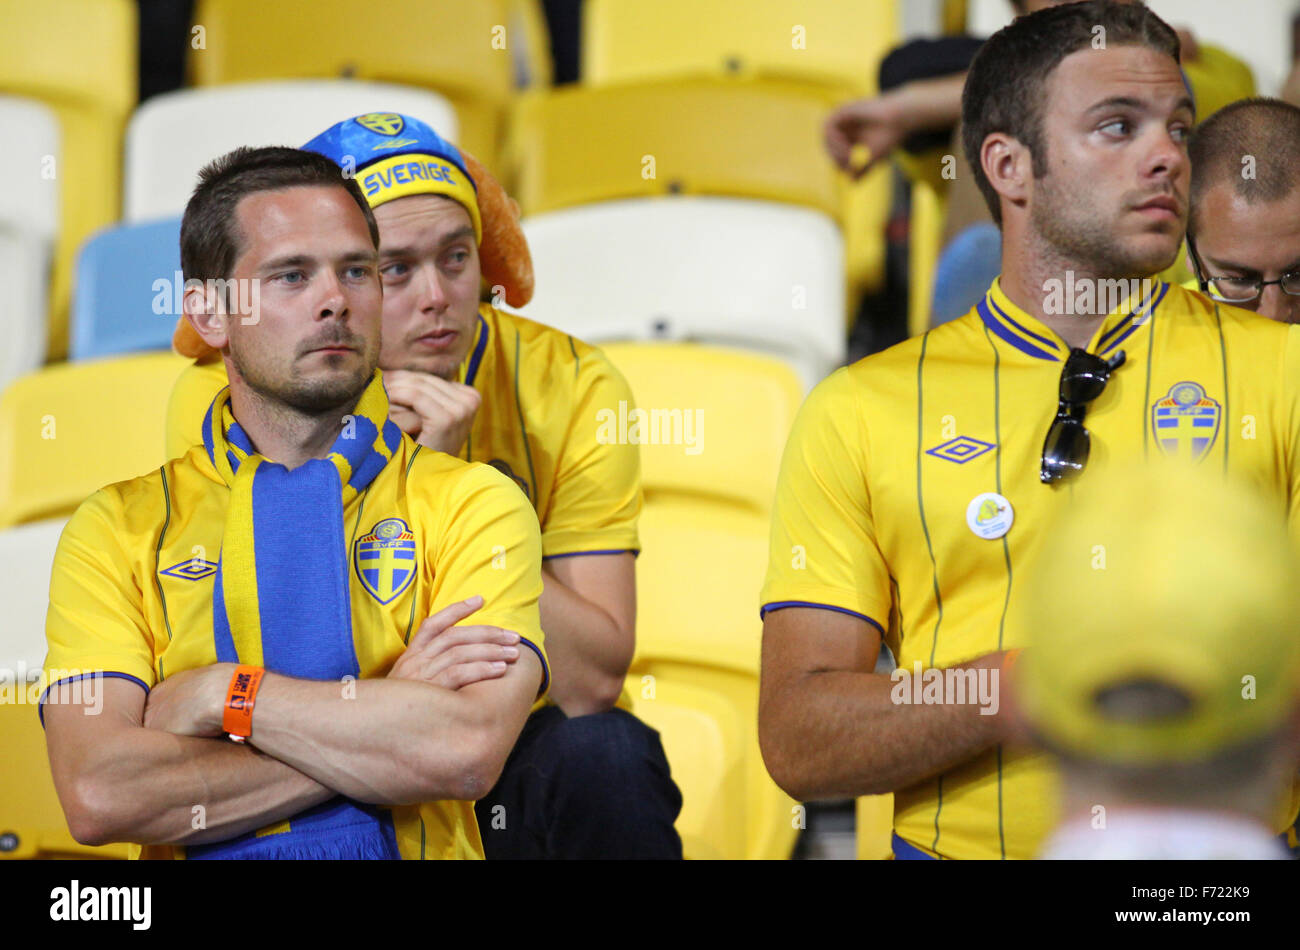 Swedish soccer fans react after England beat of Sweden in their UEFA EURO 2012 game Stock Photo